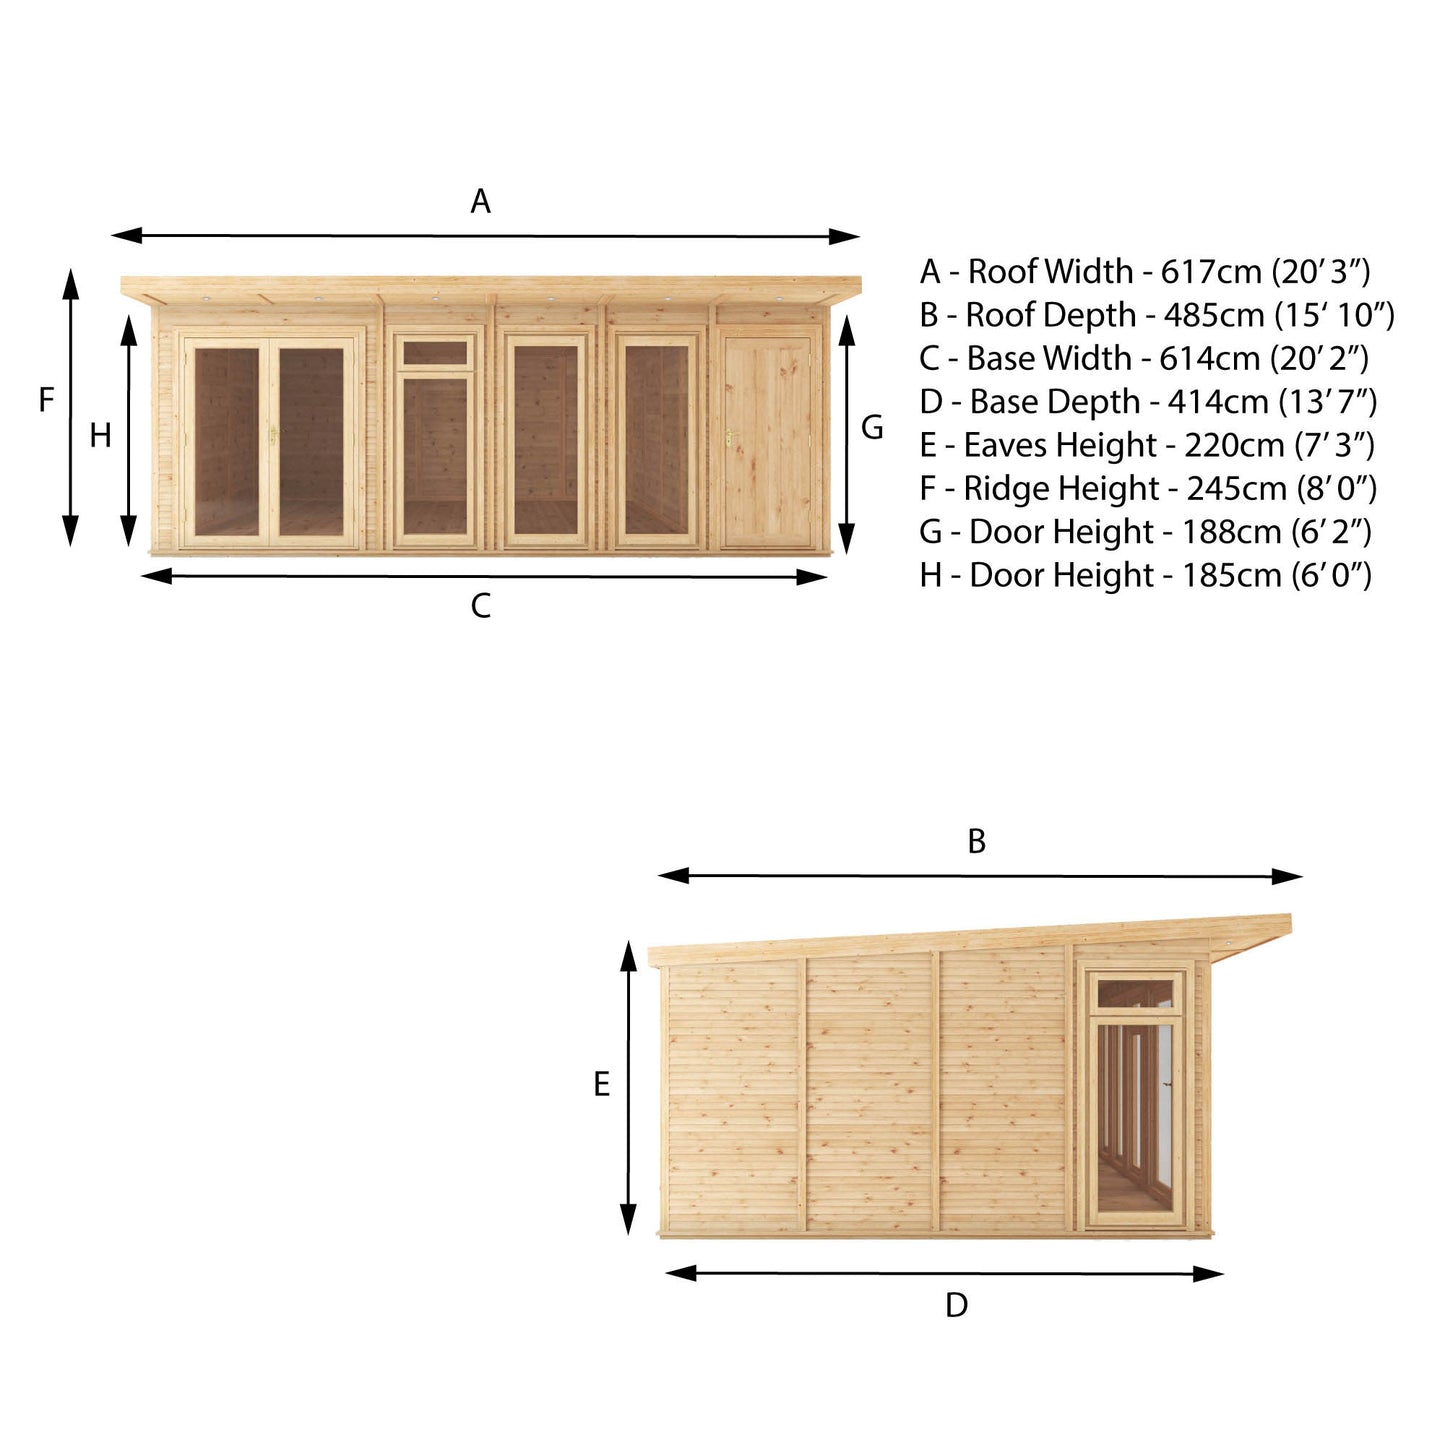 6 x 4m Insulated Garden Room with Side Shed